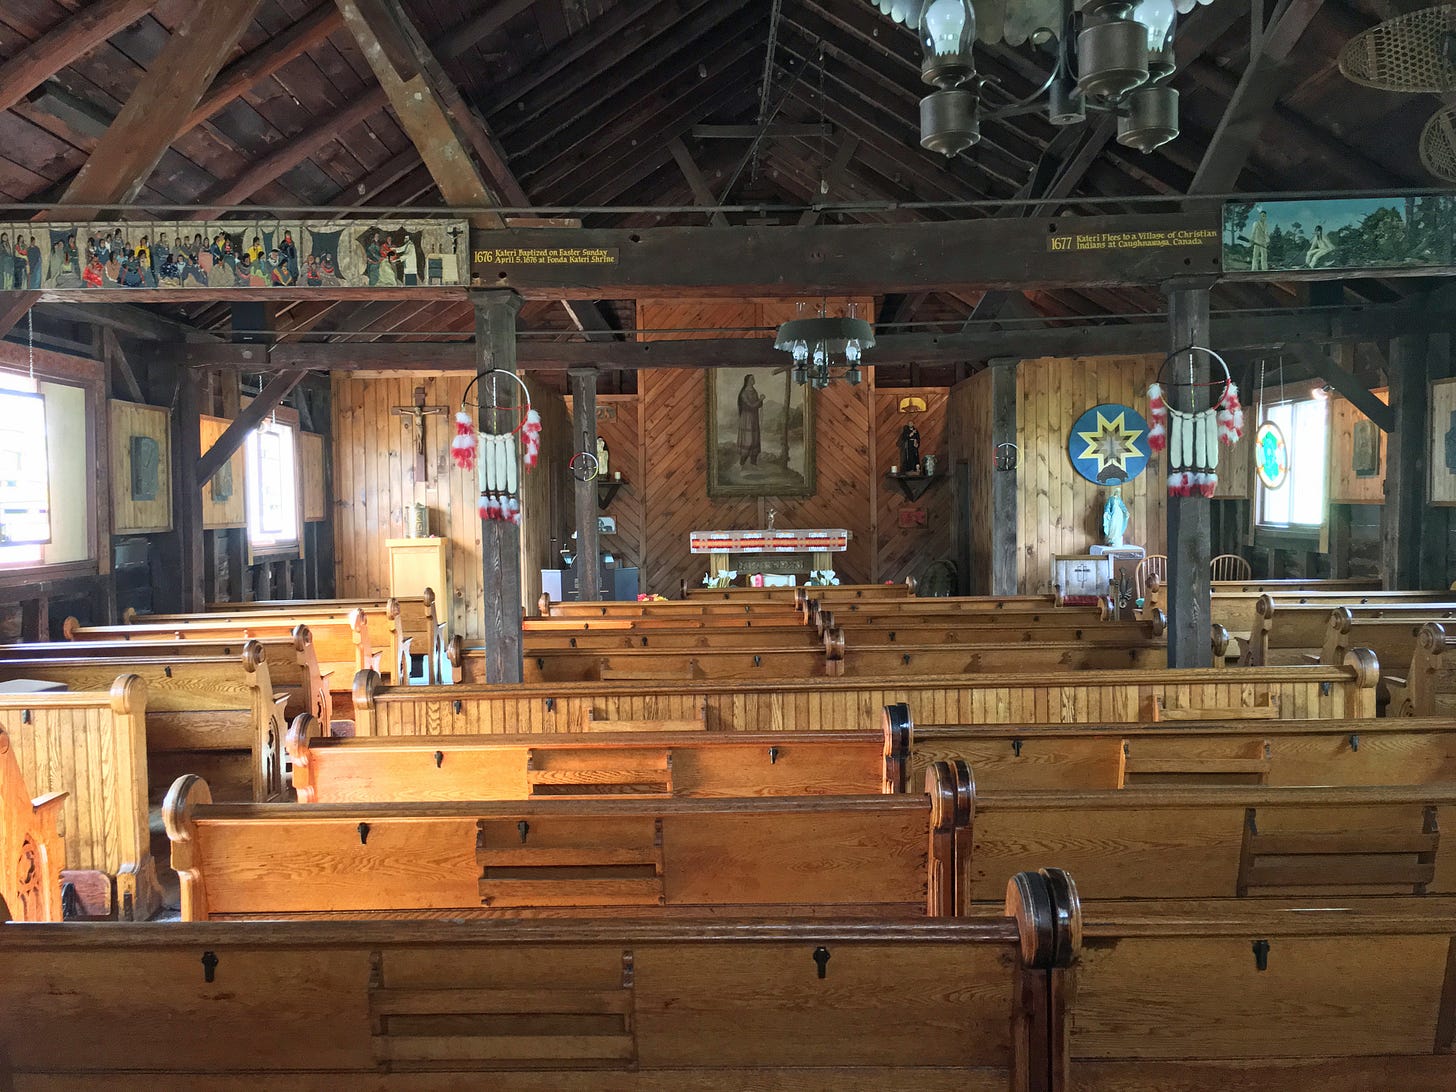 Interior of a rustic church hung with Catholic icons, Native American totems, and depictions of Kateri Tekakwitha.